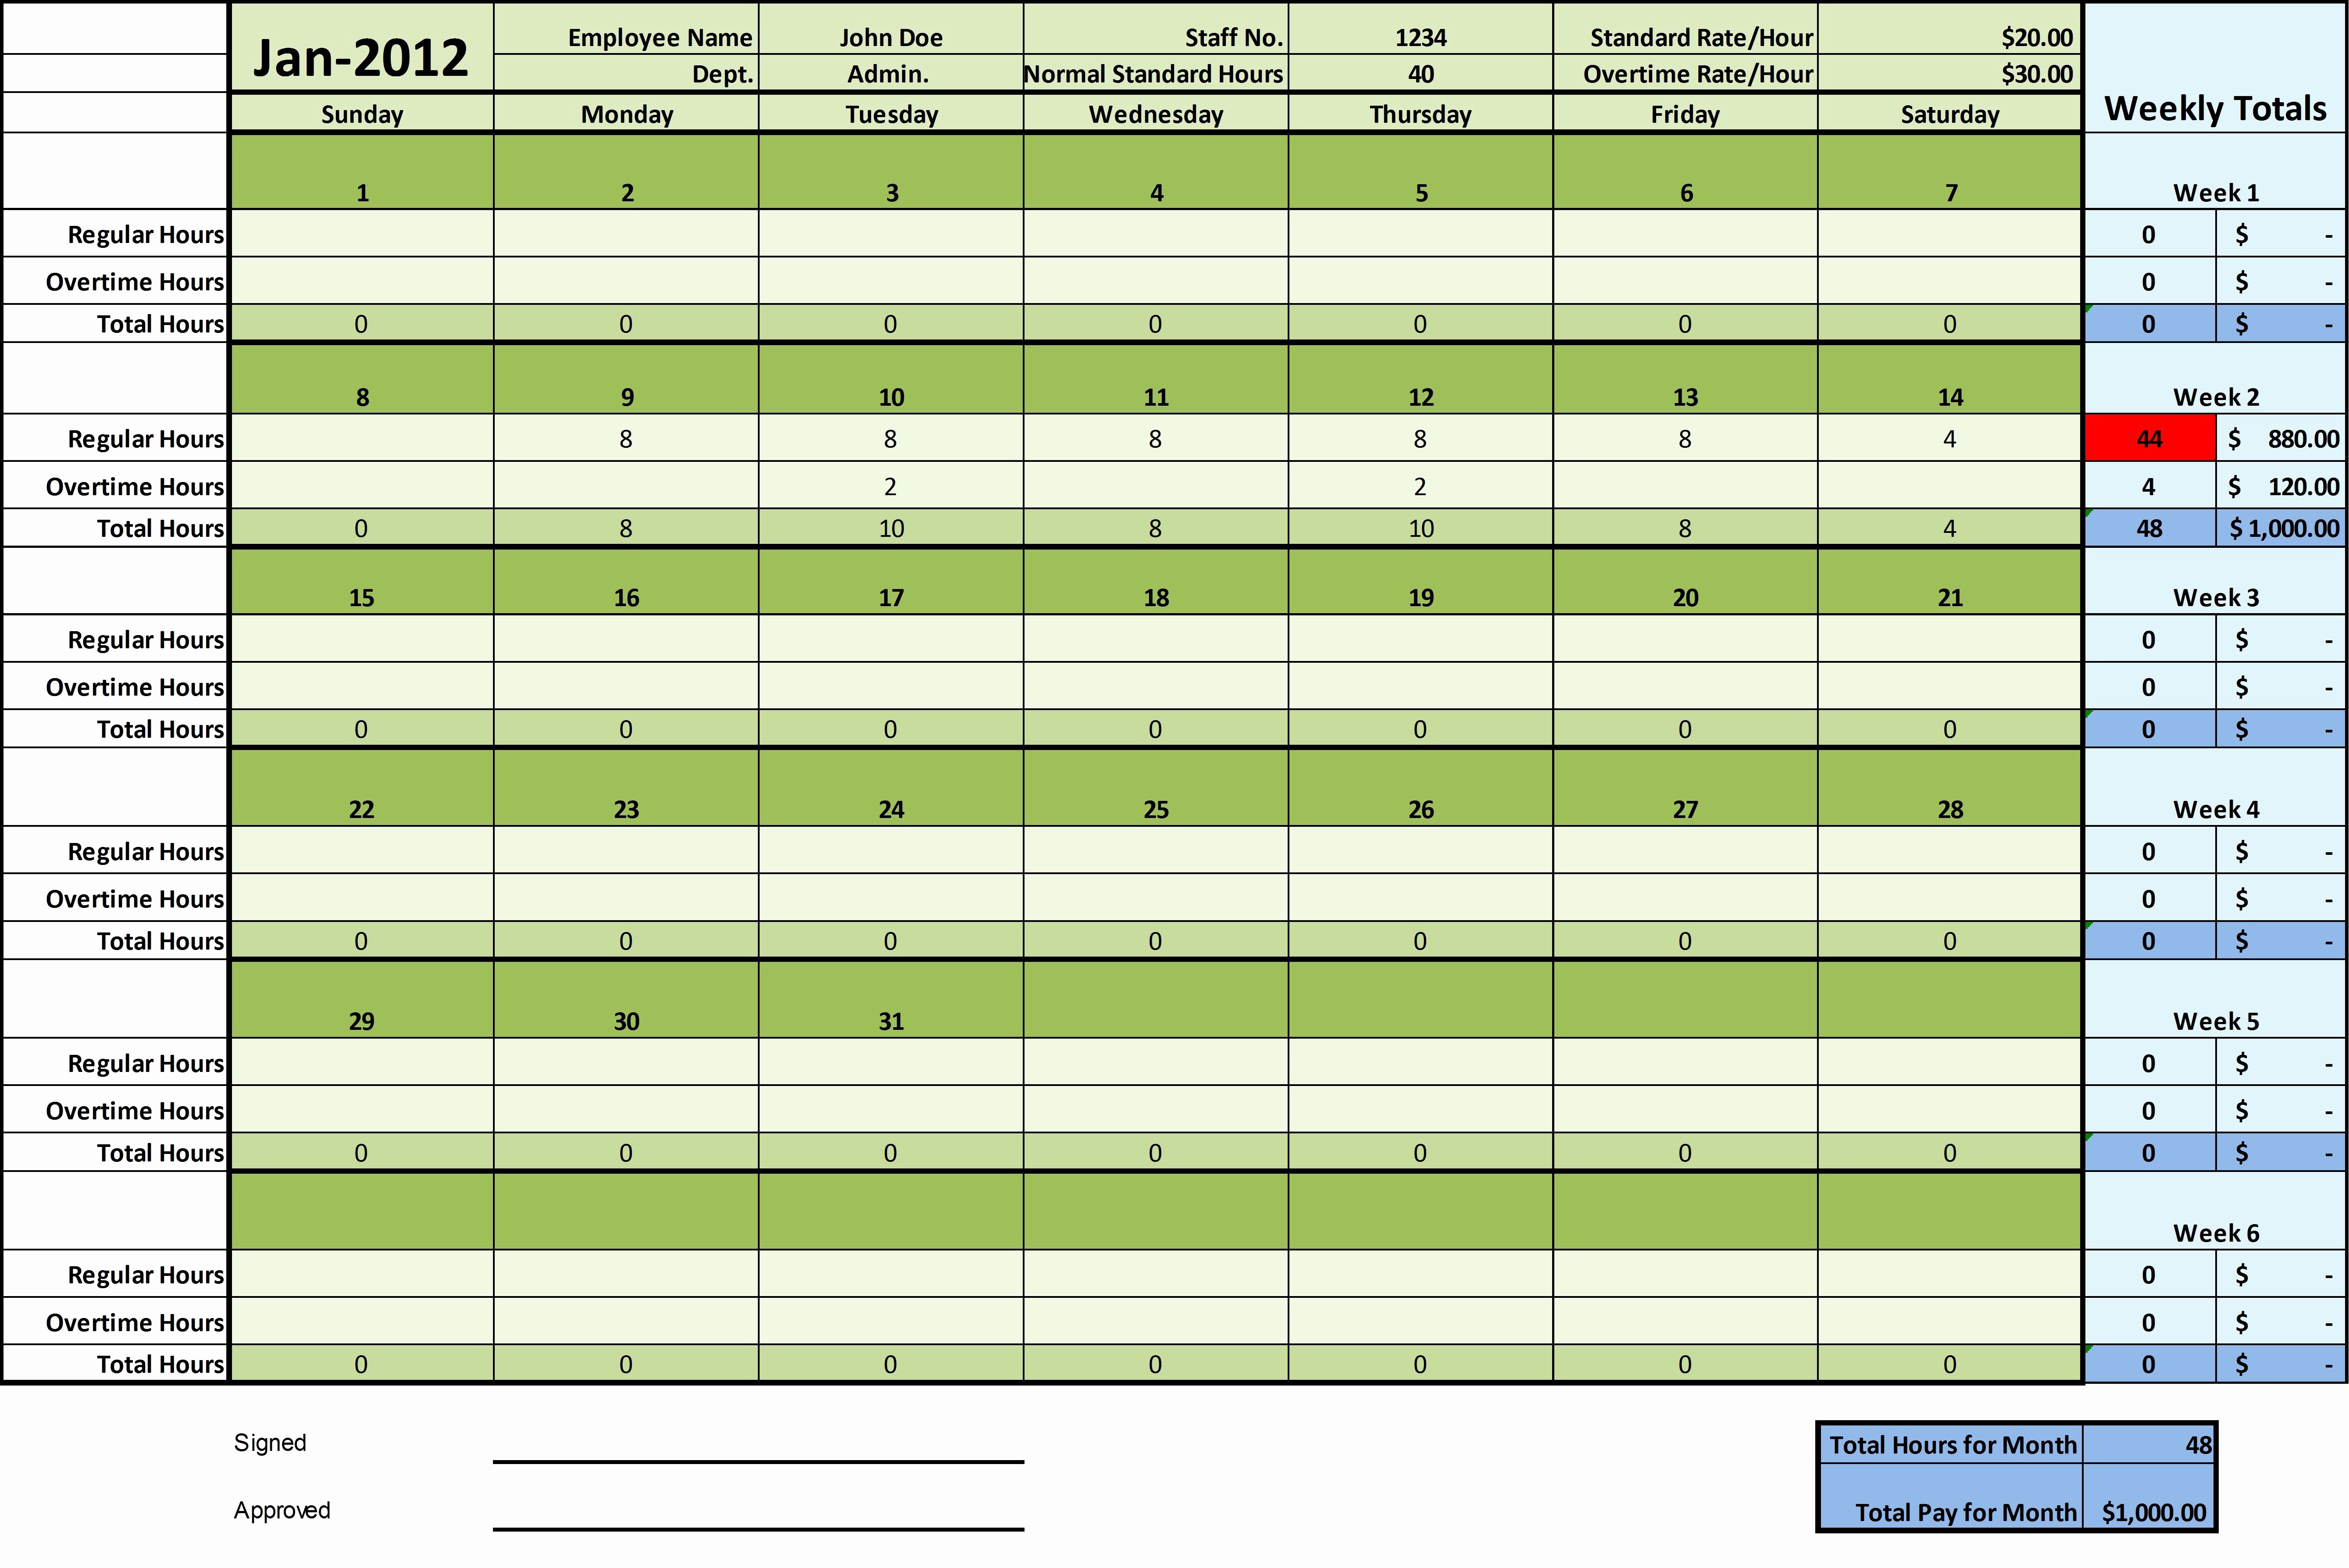 Training Matrix Template Free Excel Best Of Free Excel Training Matrix Templates Training Matrix